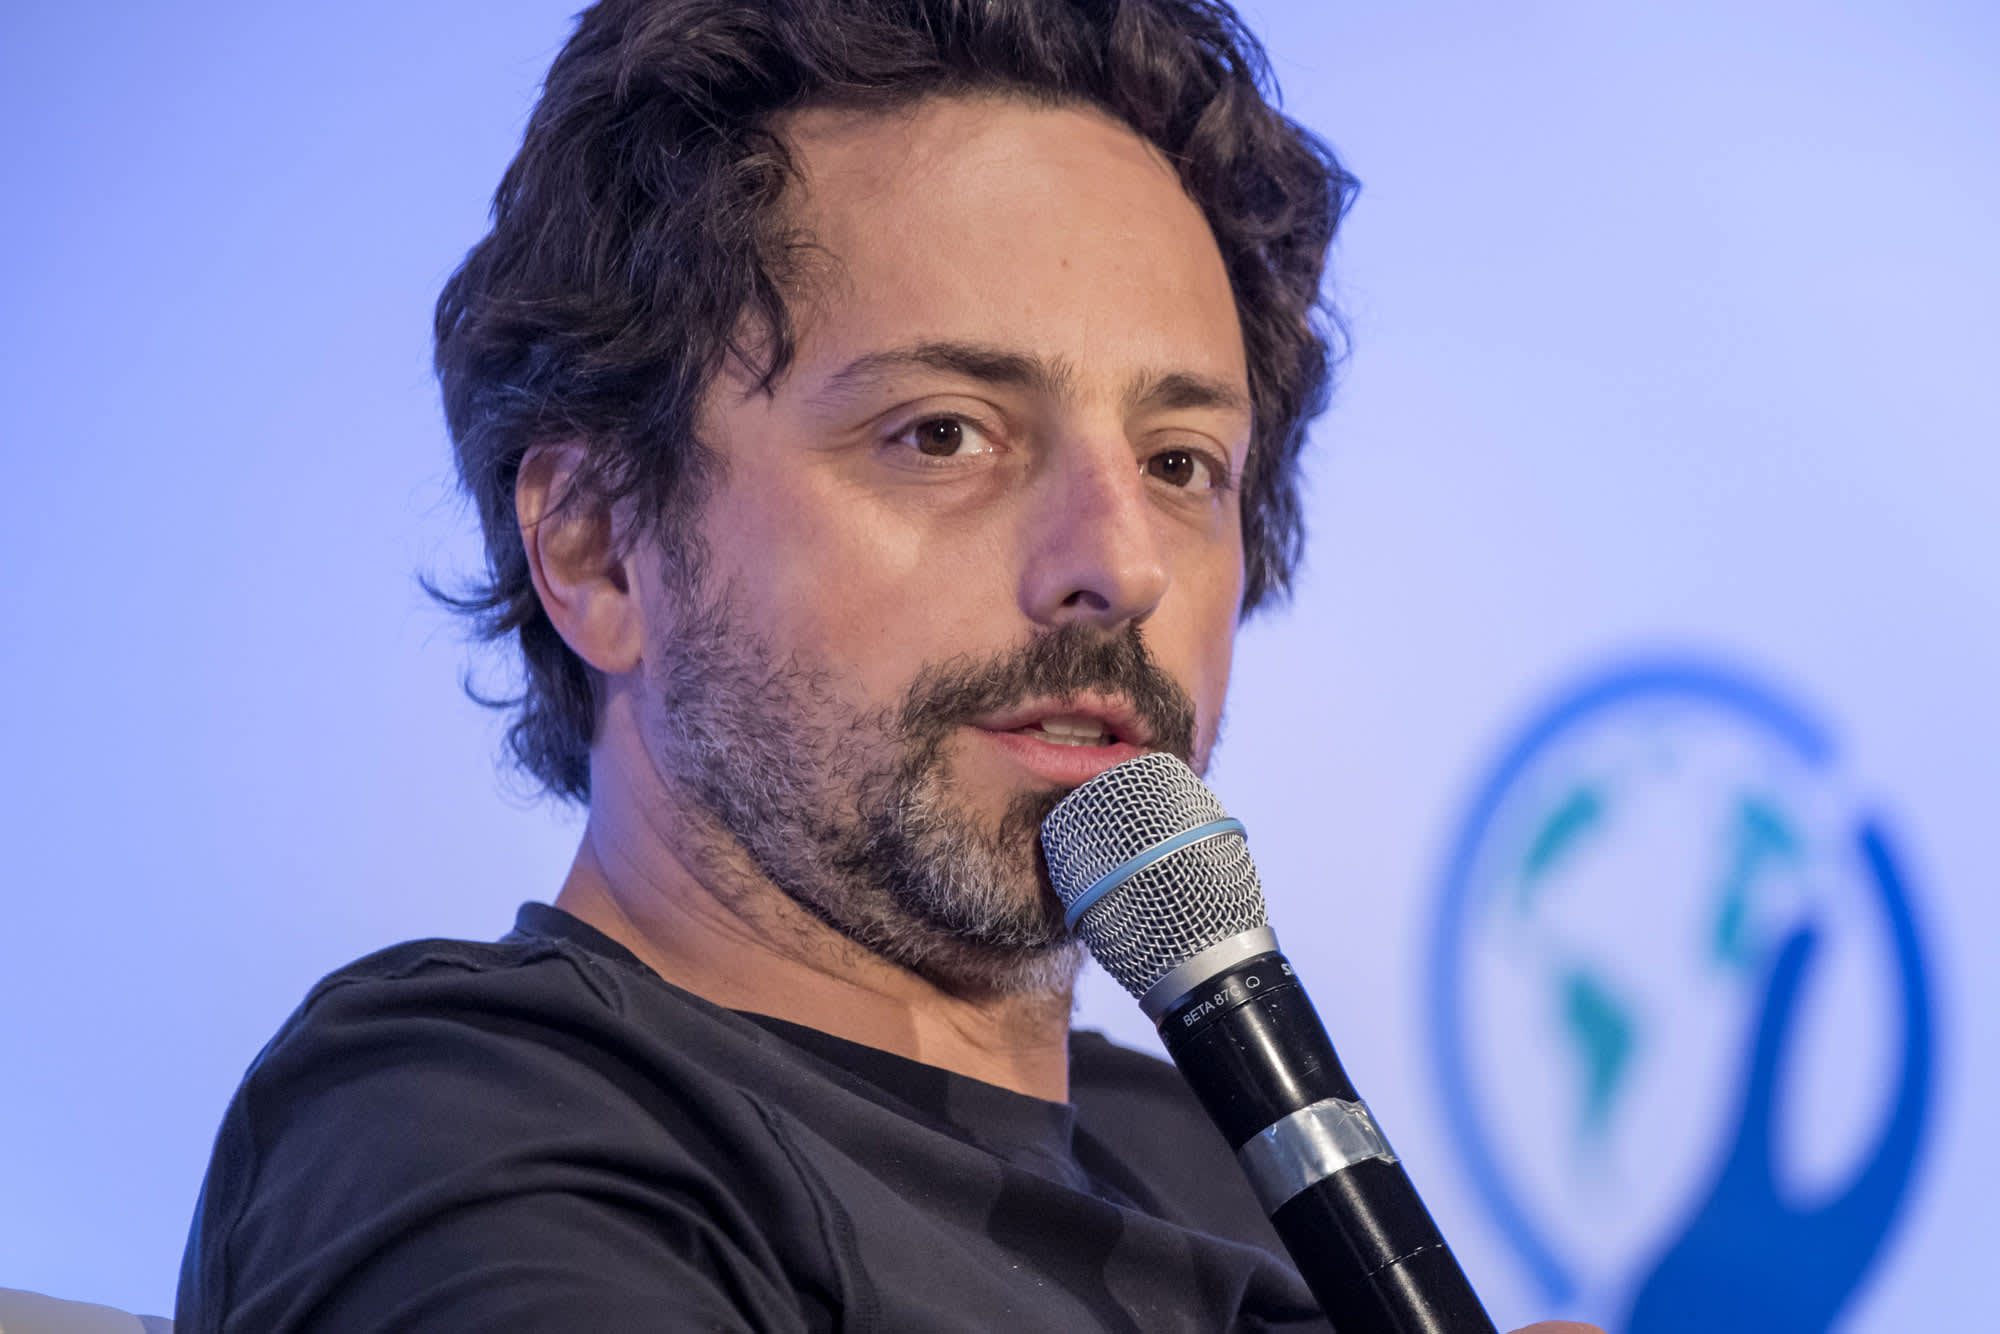 Sergey Brin says Google ‘definitely messed up’ with Gemini launch